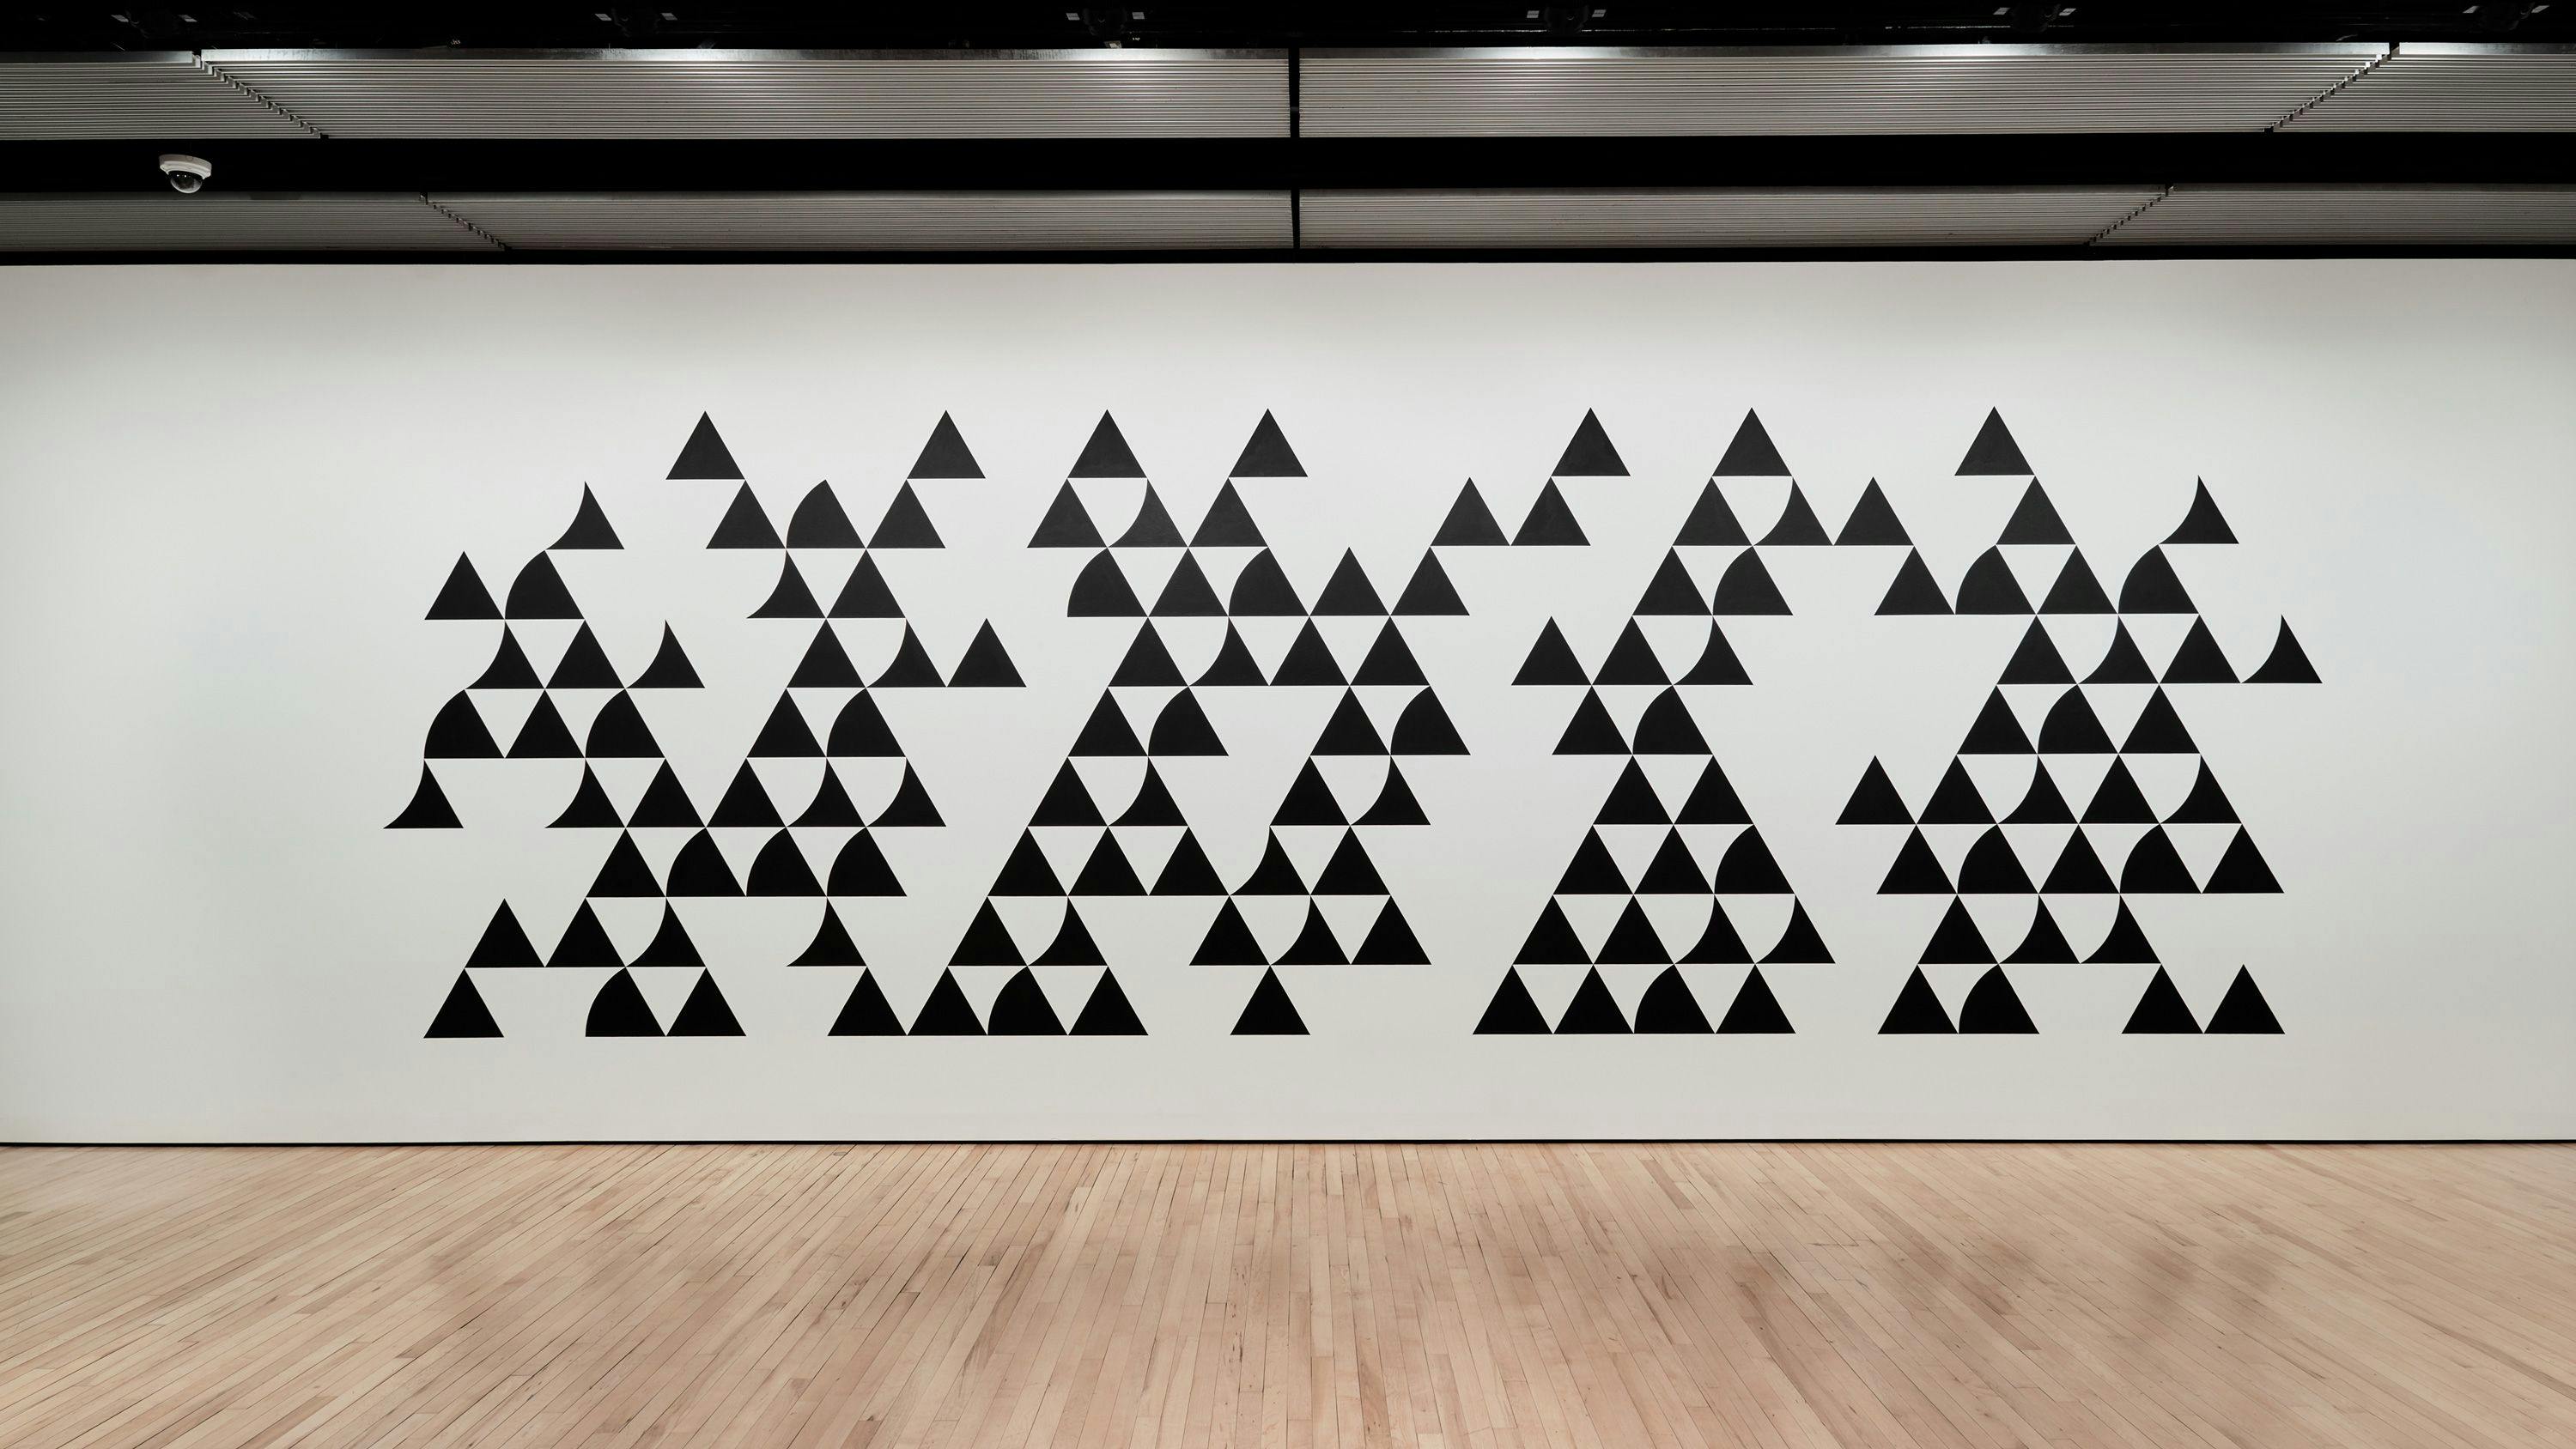 An installation view of the exhibition, Bridget Riley at Hayward Gallery, dated in 2019 and 2020.